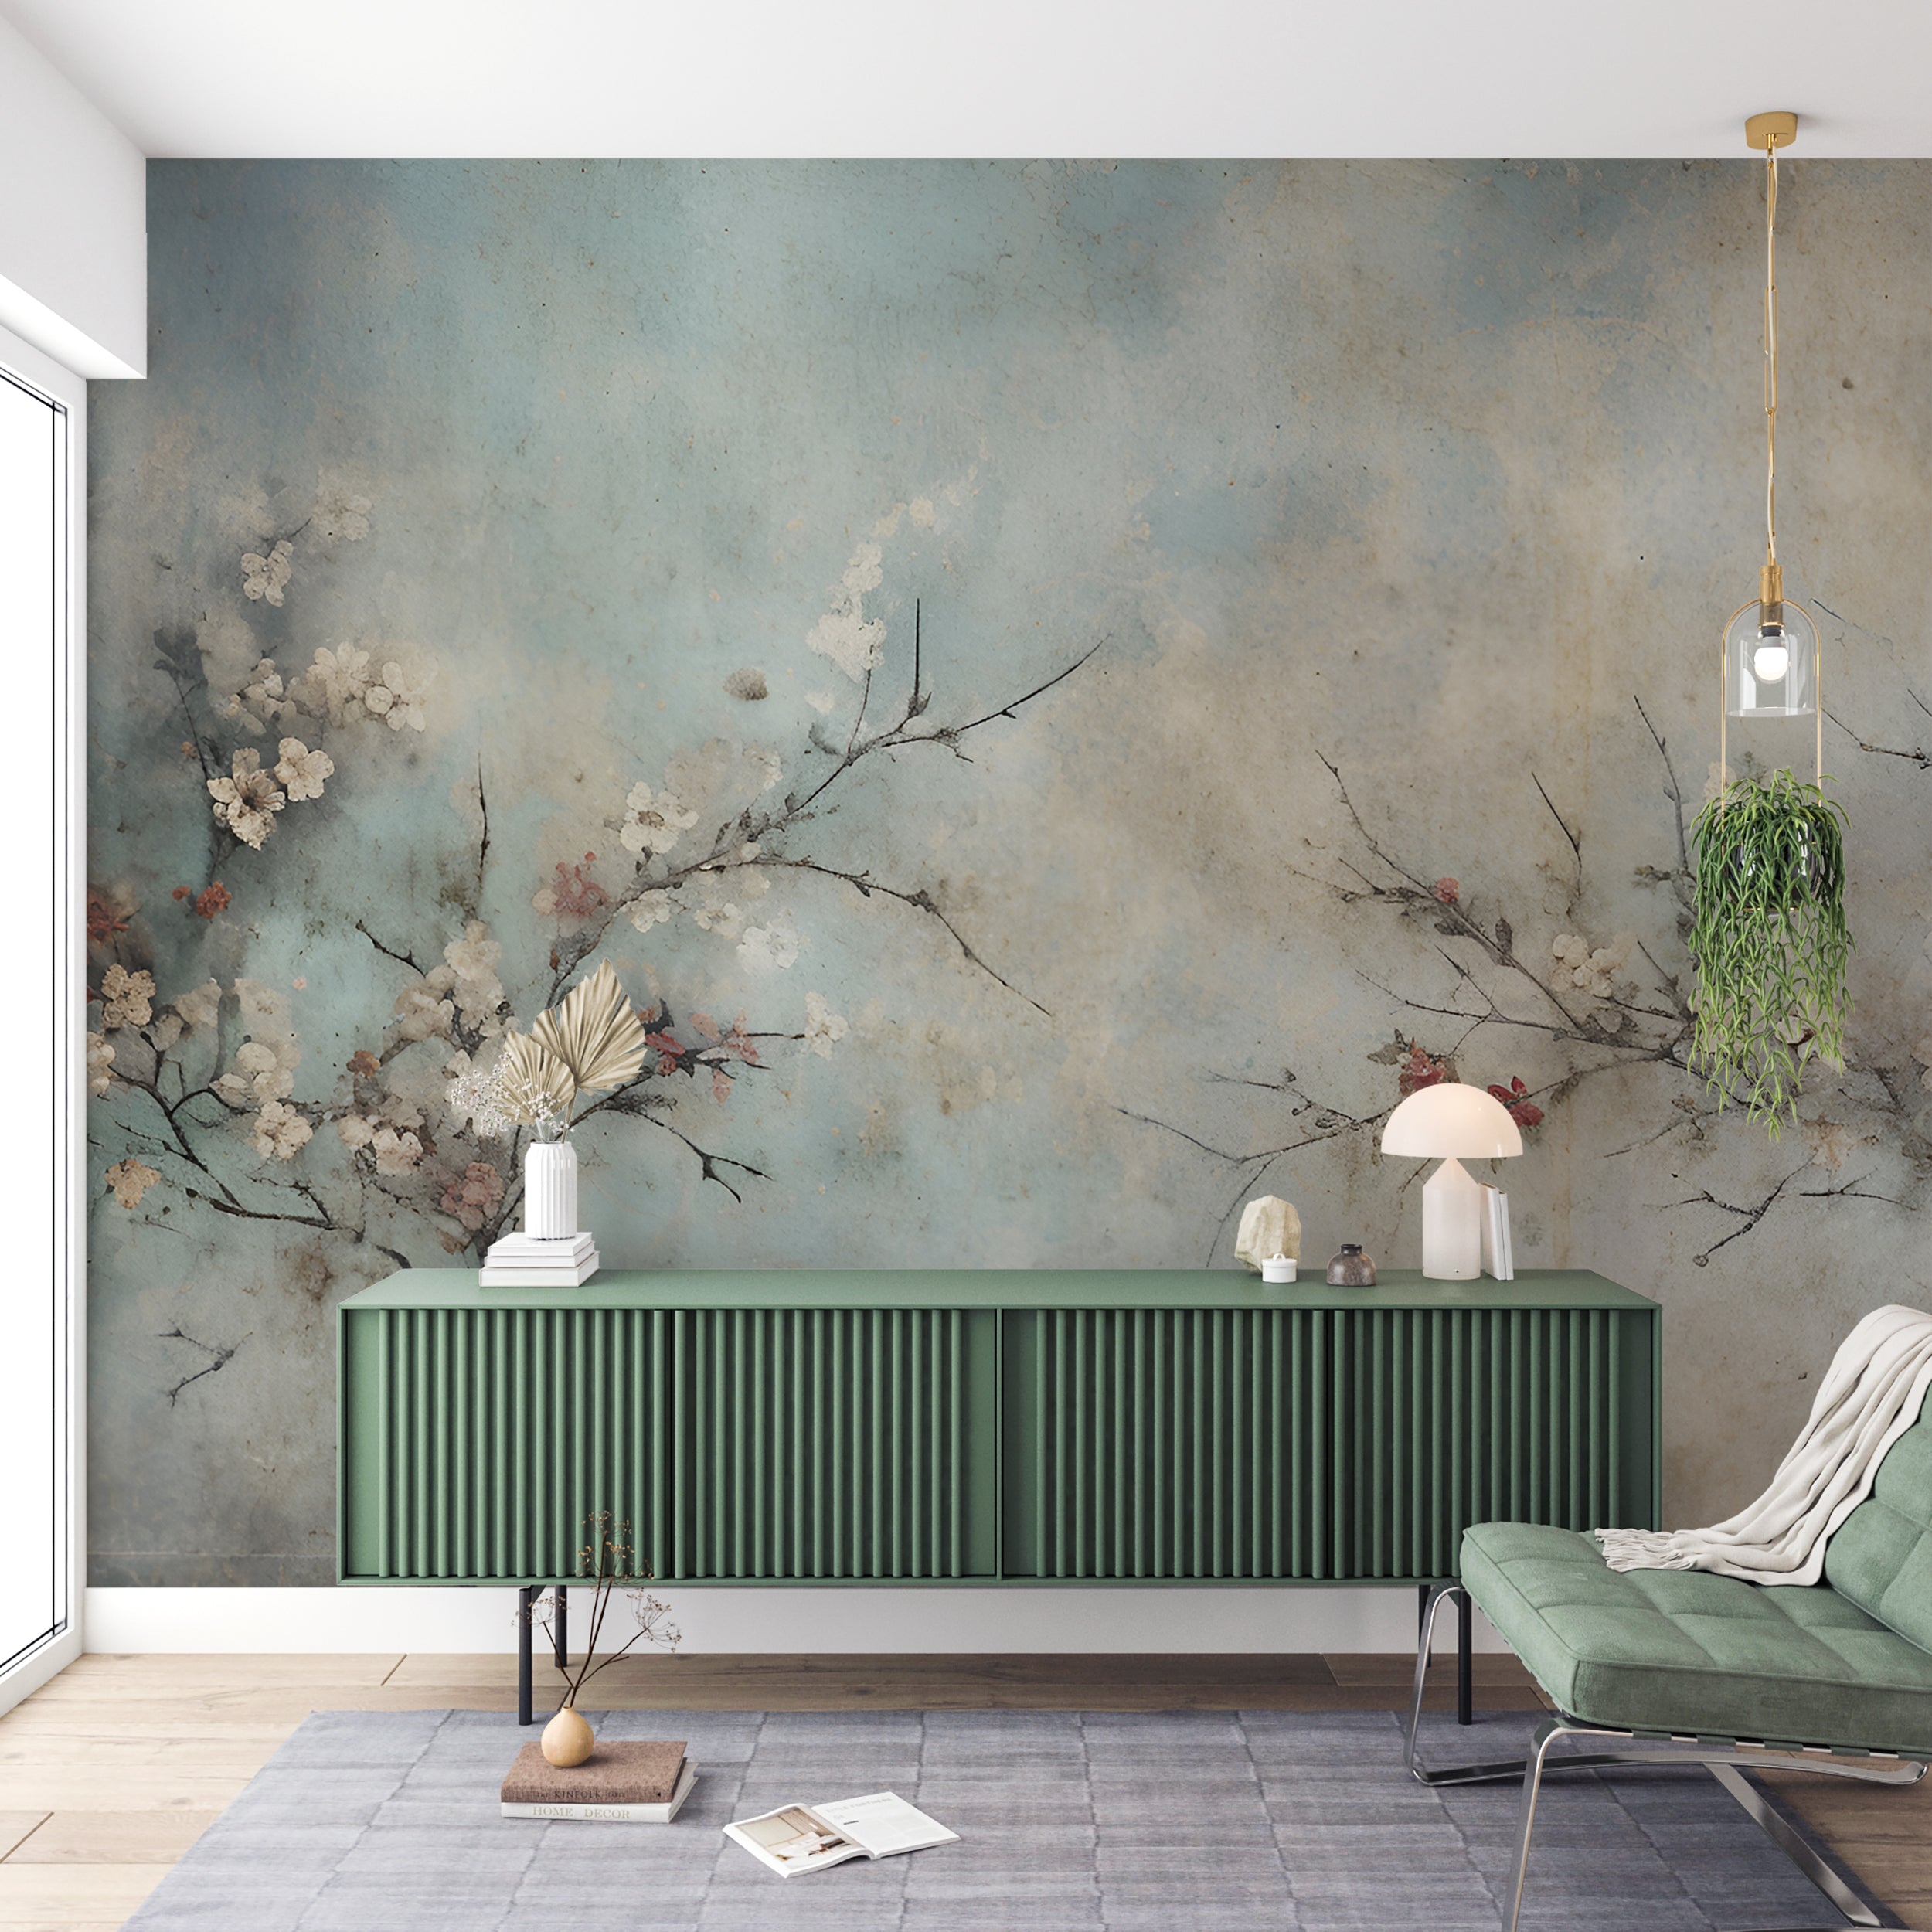 Toile De Jouy Mural for Timeless Ambiance